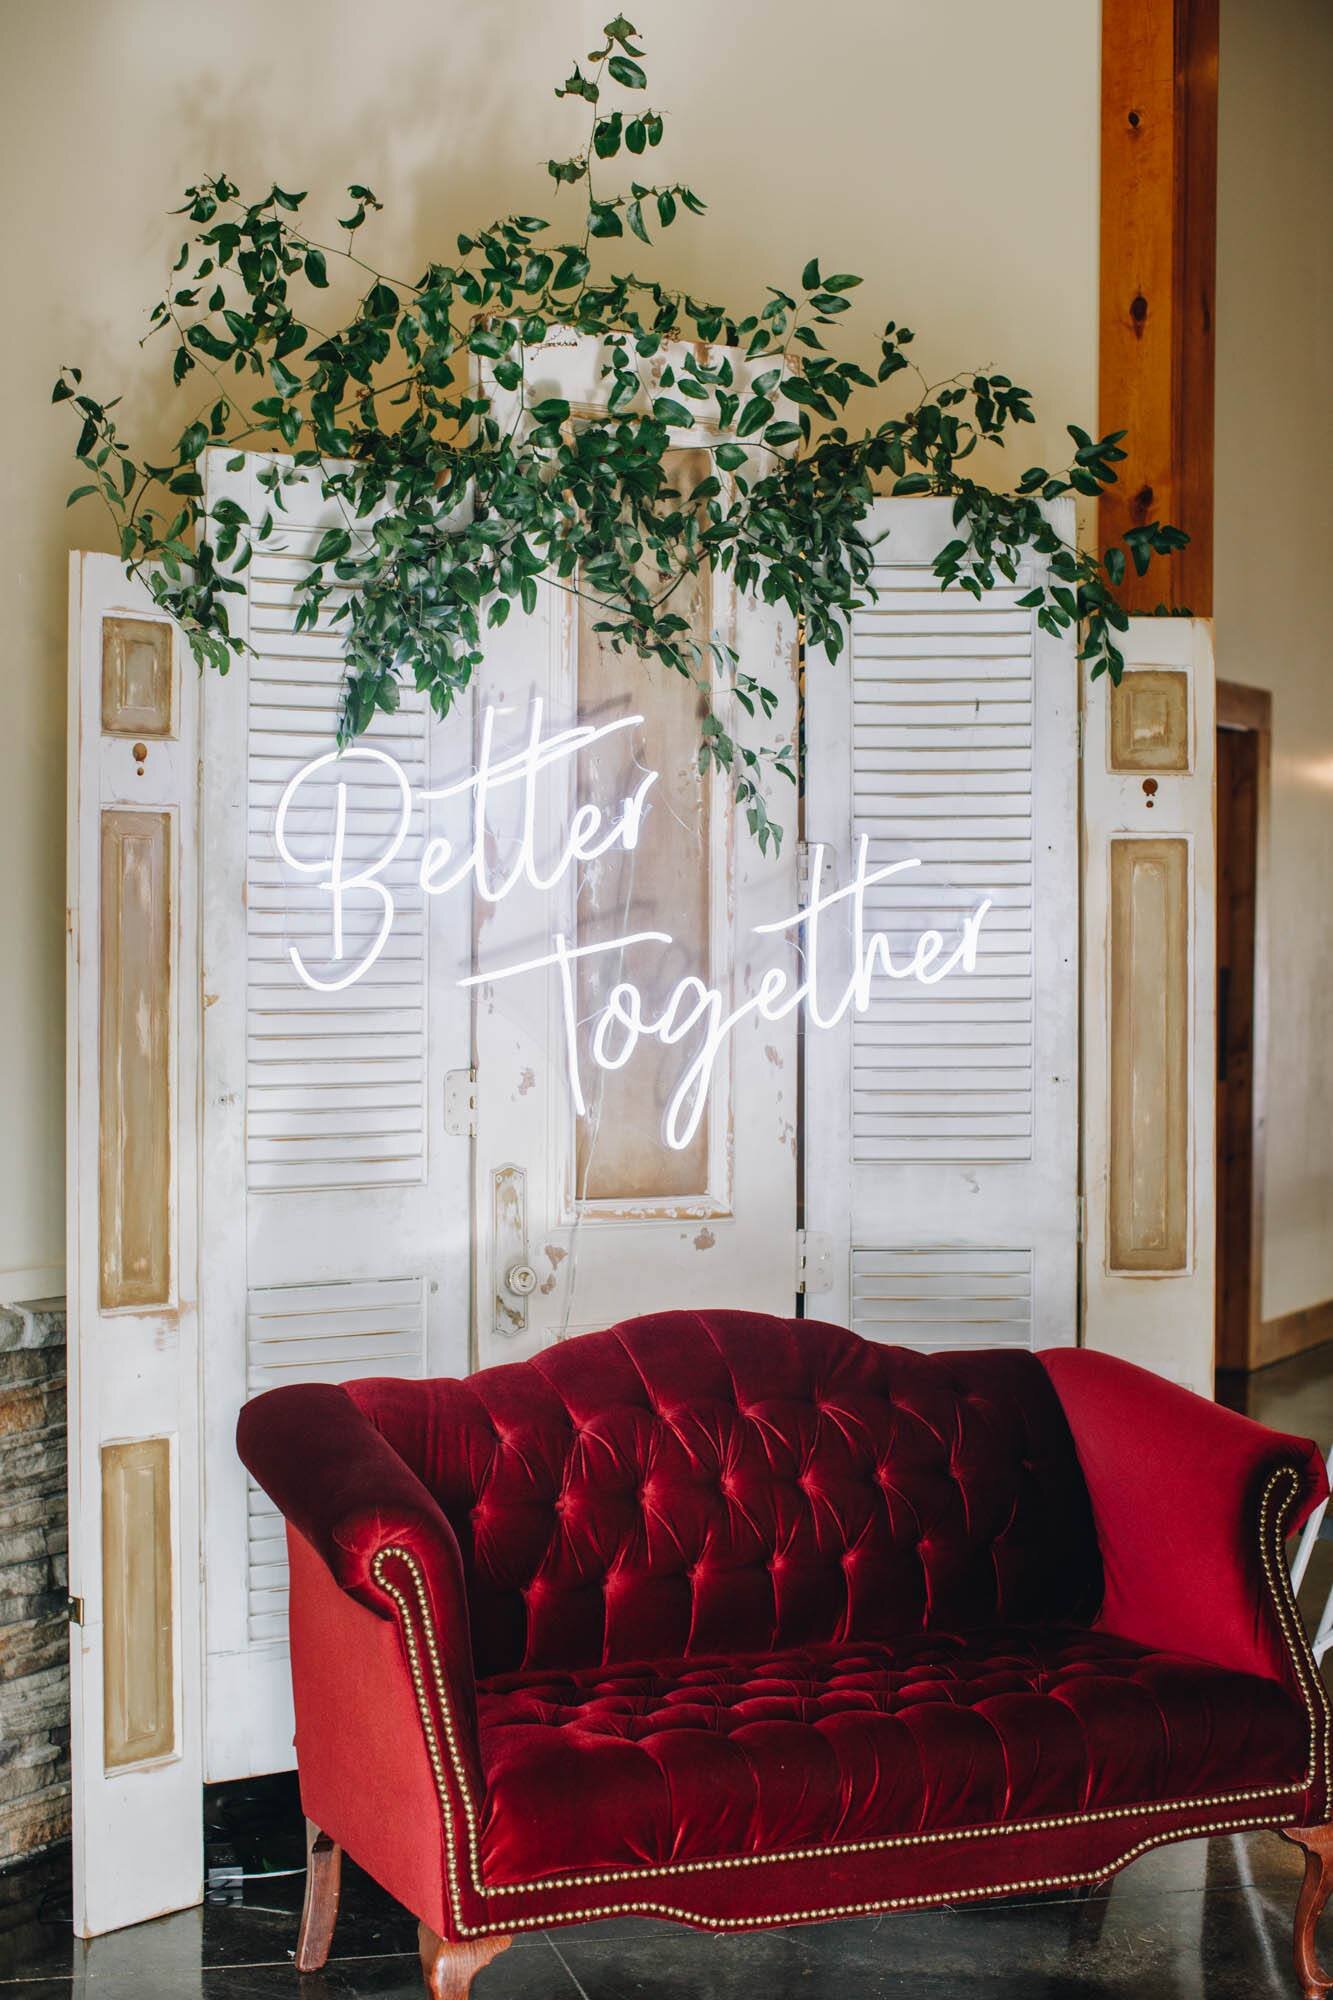 Better together Image with Red Couch.jpg